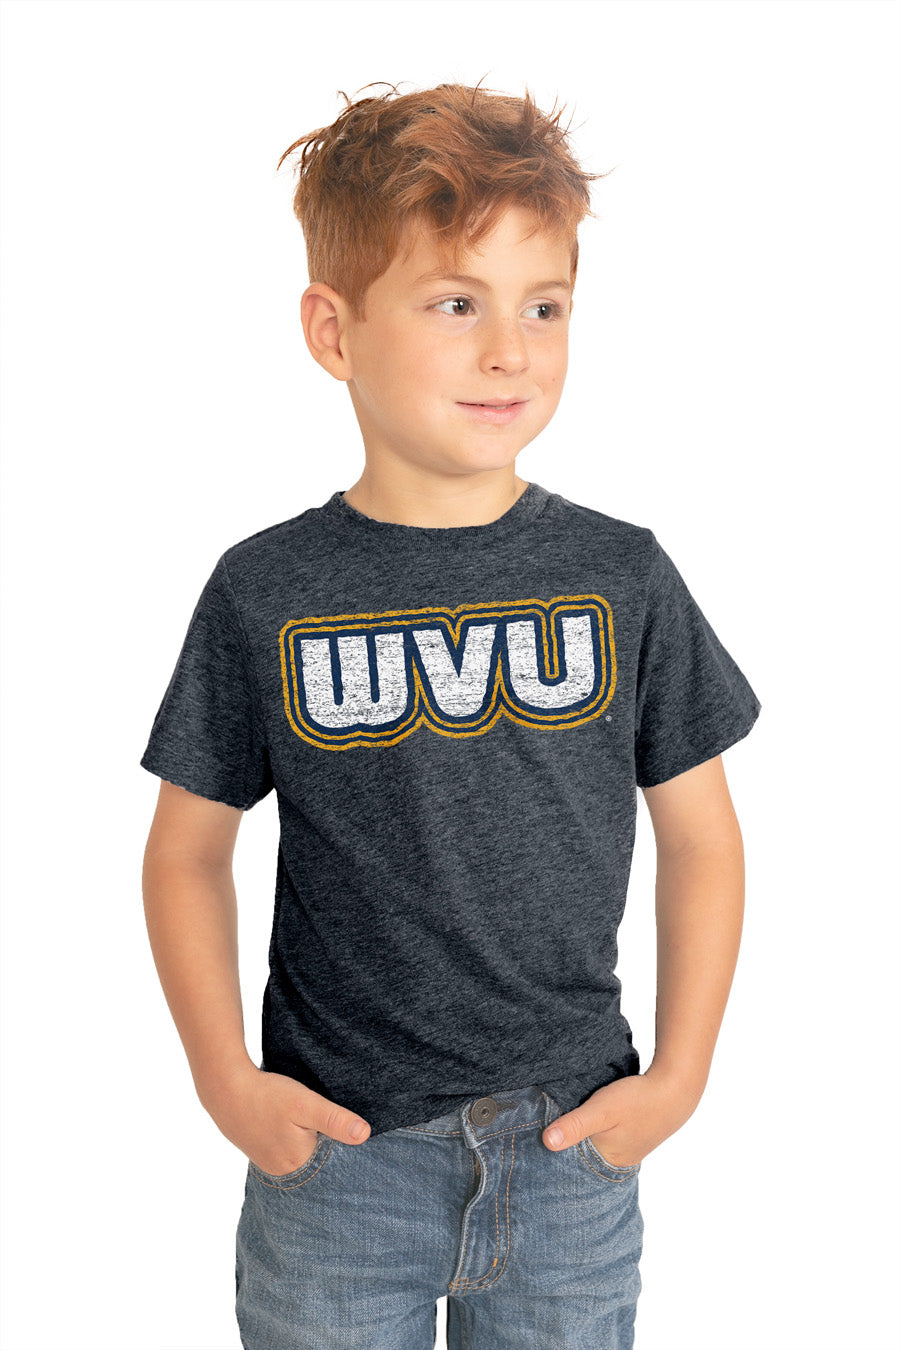 WEST VIRGINIA MOUNTAINEERS  "IT'S A WIN" YOUTH TEE